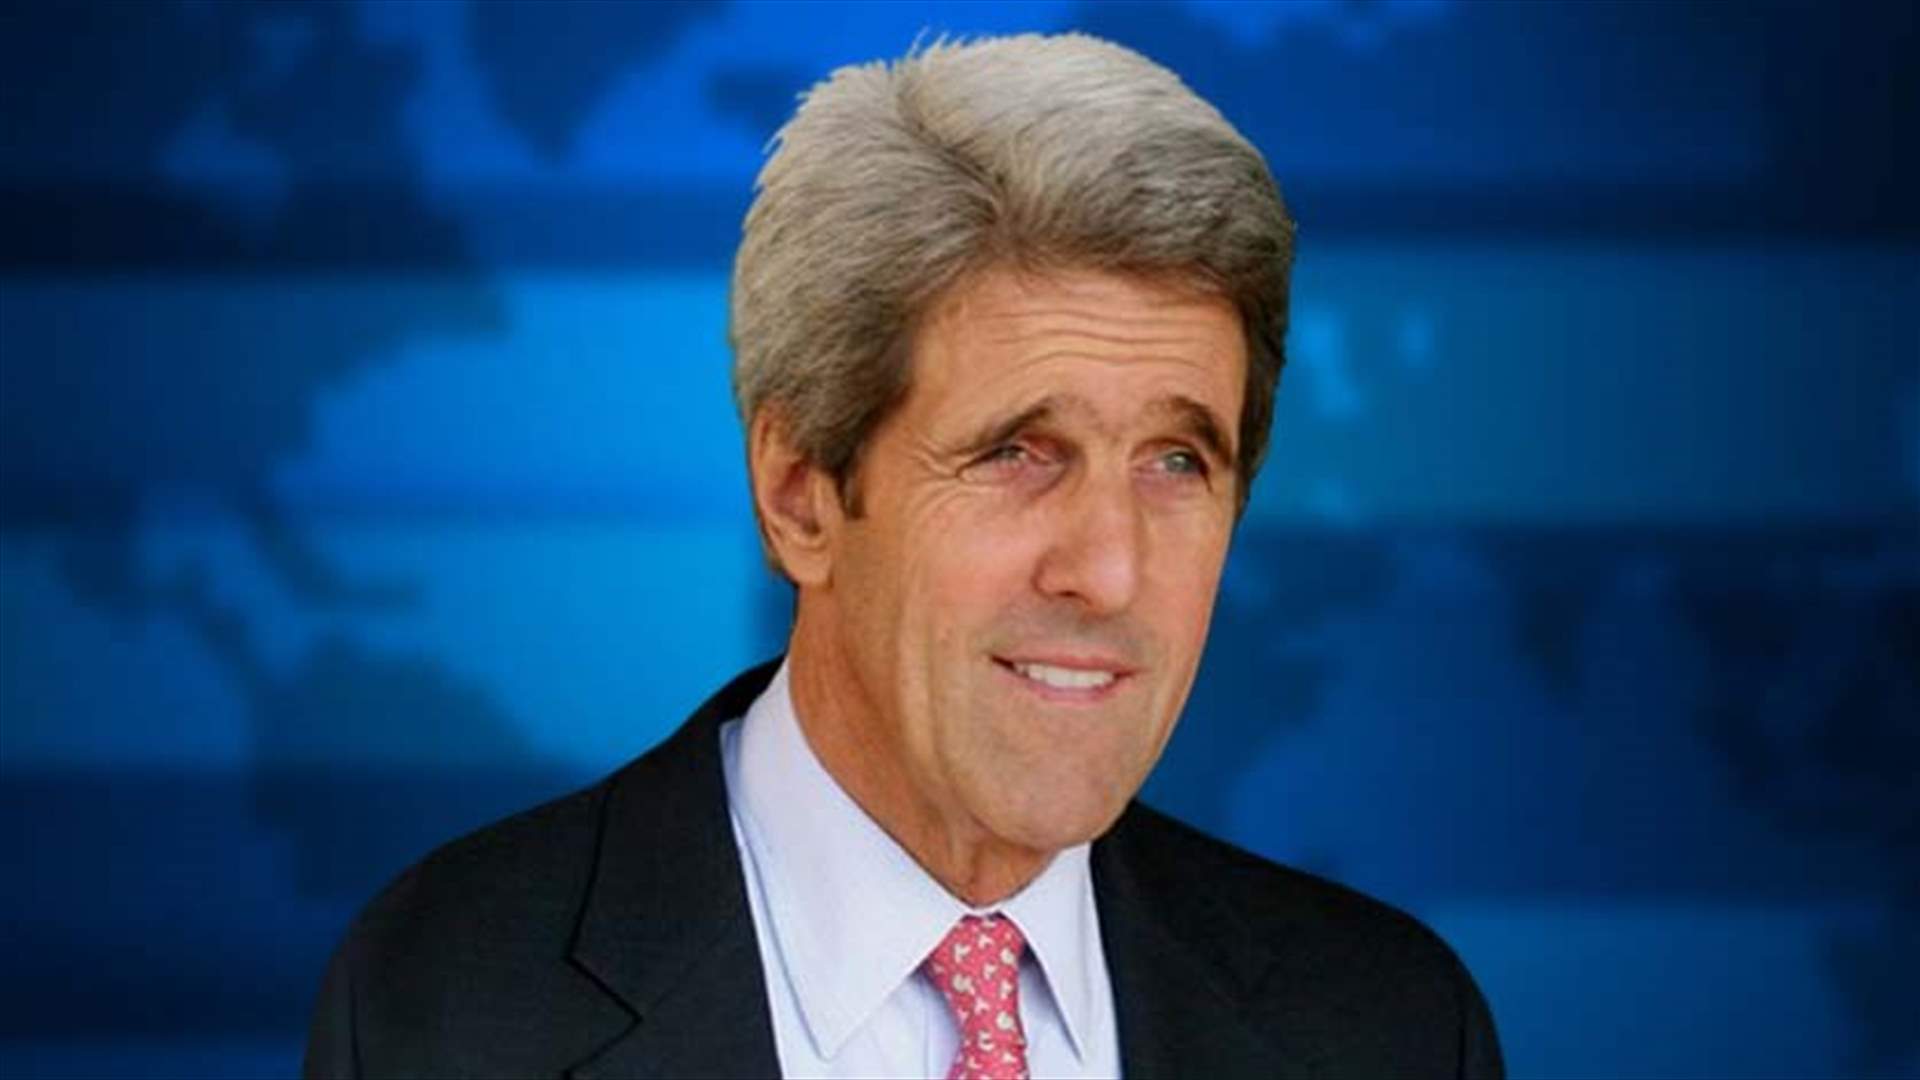 Kerry urges Congress not to rush to renew Iran sanctions measure